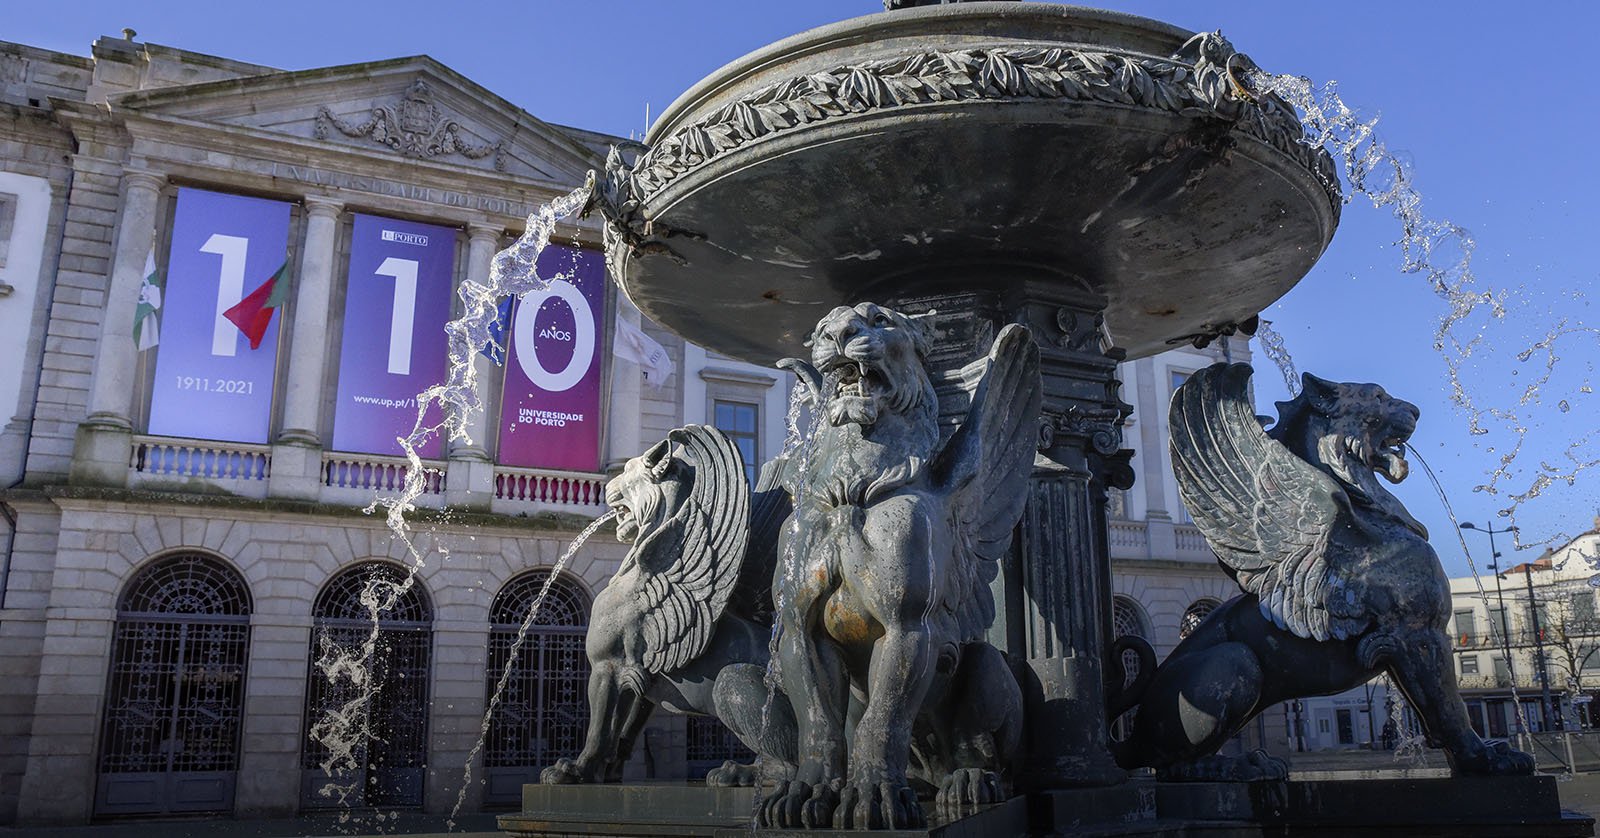 Photograph of the Rectory and the lion's fountain on the 110th anniversary of the U.Porto